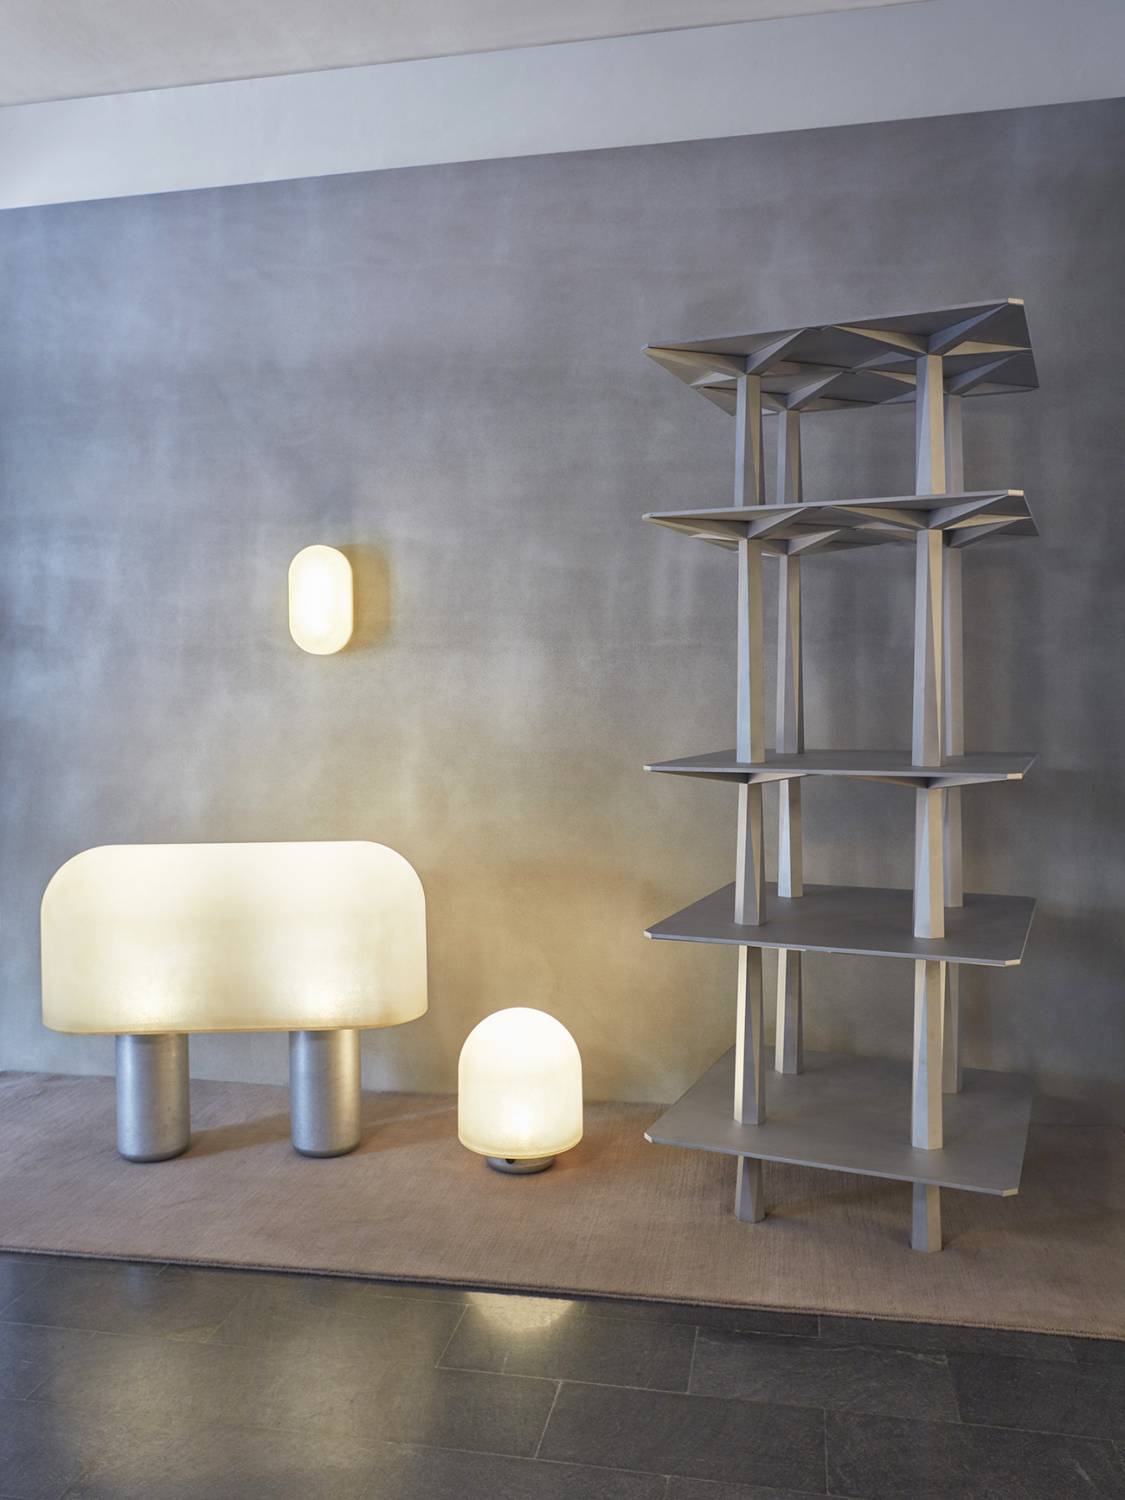 Puffball lights from Faye Toogood + aluminum Centina Totem shelving system by Oeuffice - Matter Made "MM XVII" collection in Milan | Flodeau.com